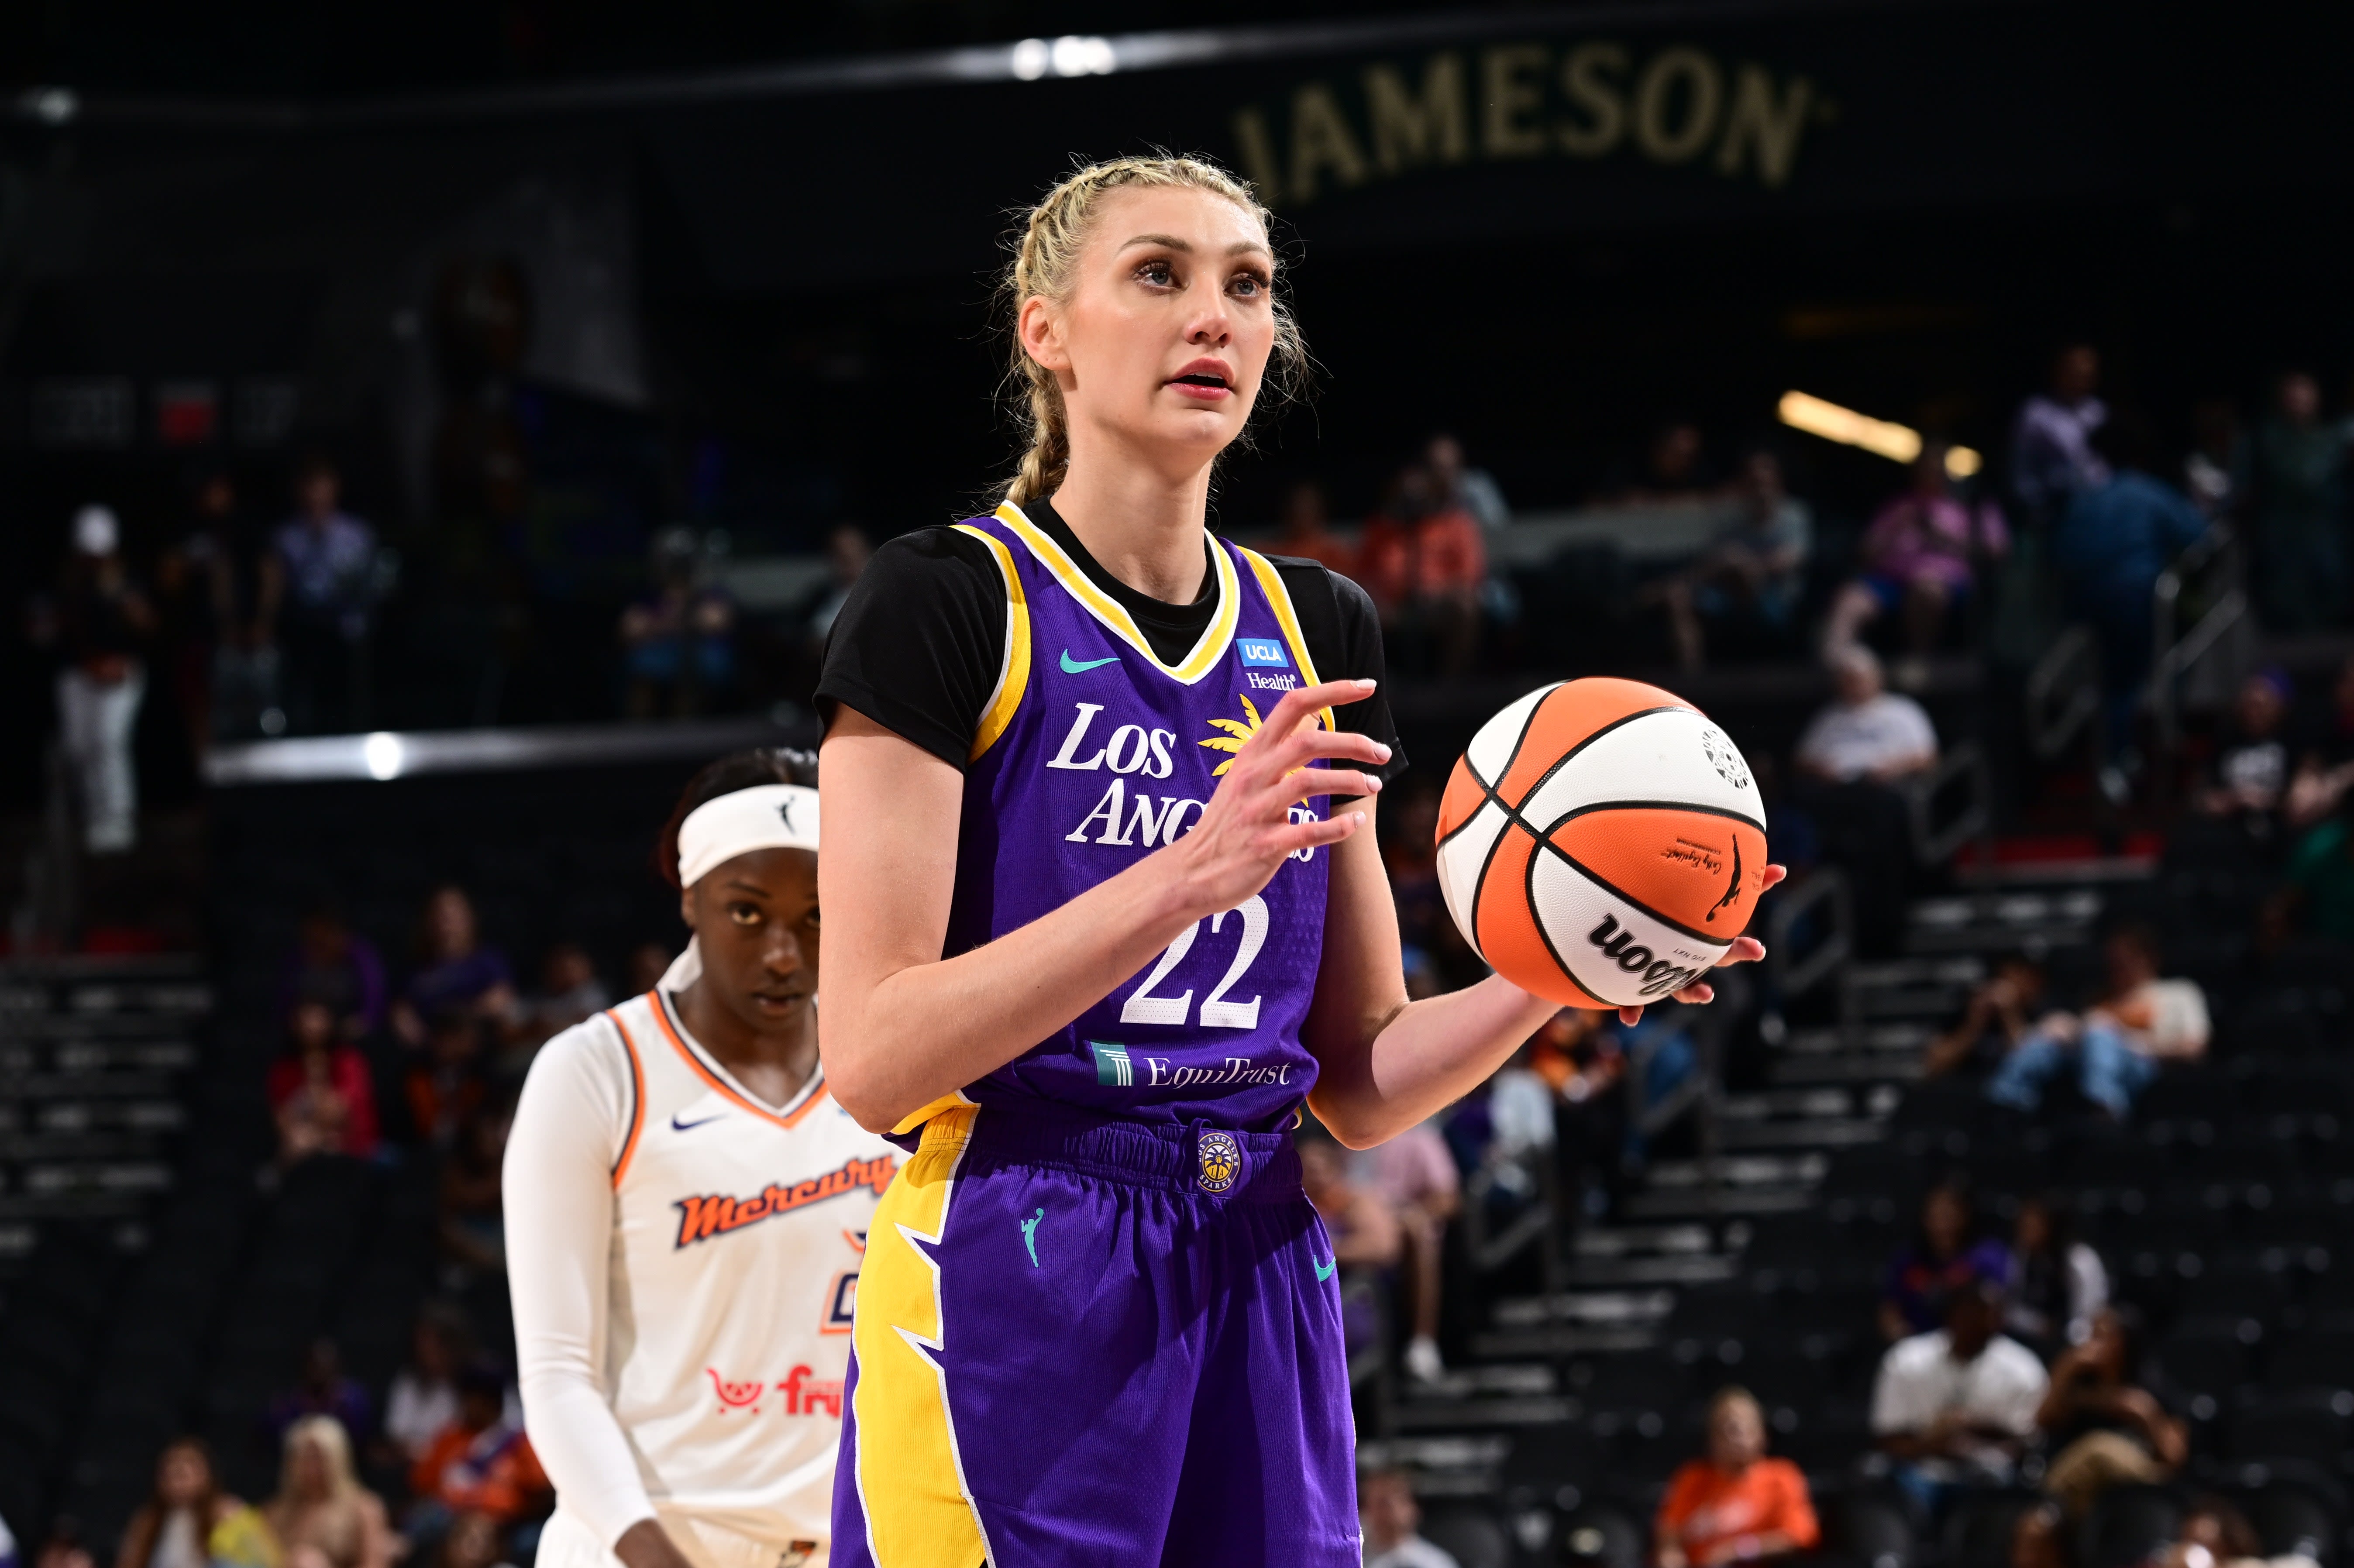 8 Things to Know About Cameron Brink After Her WNBA Debut